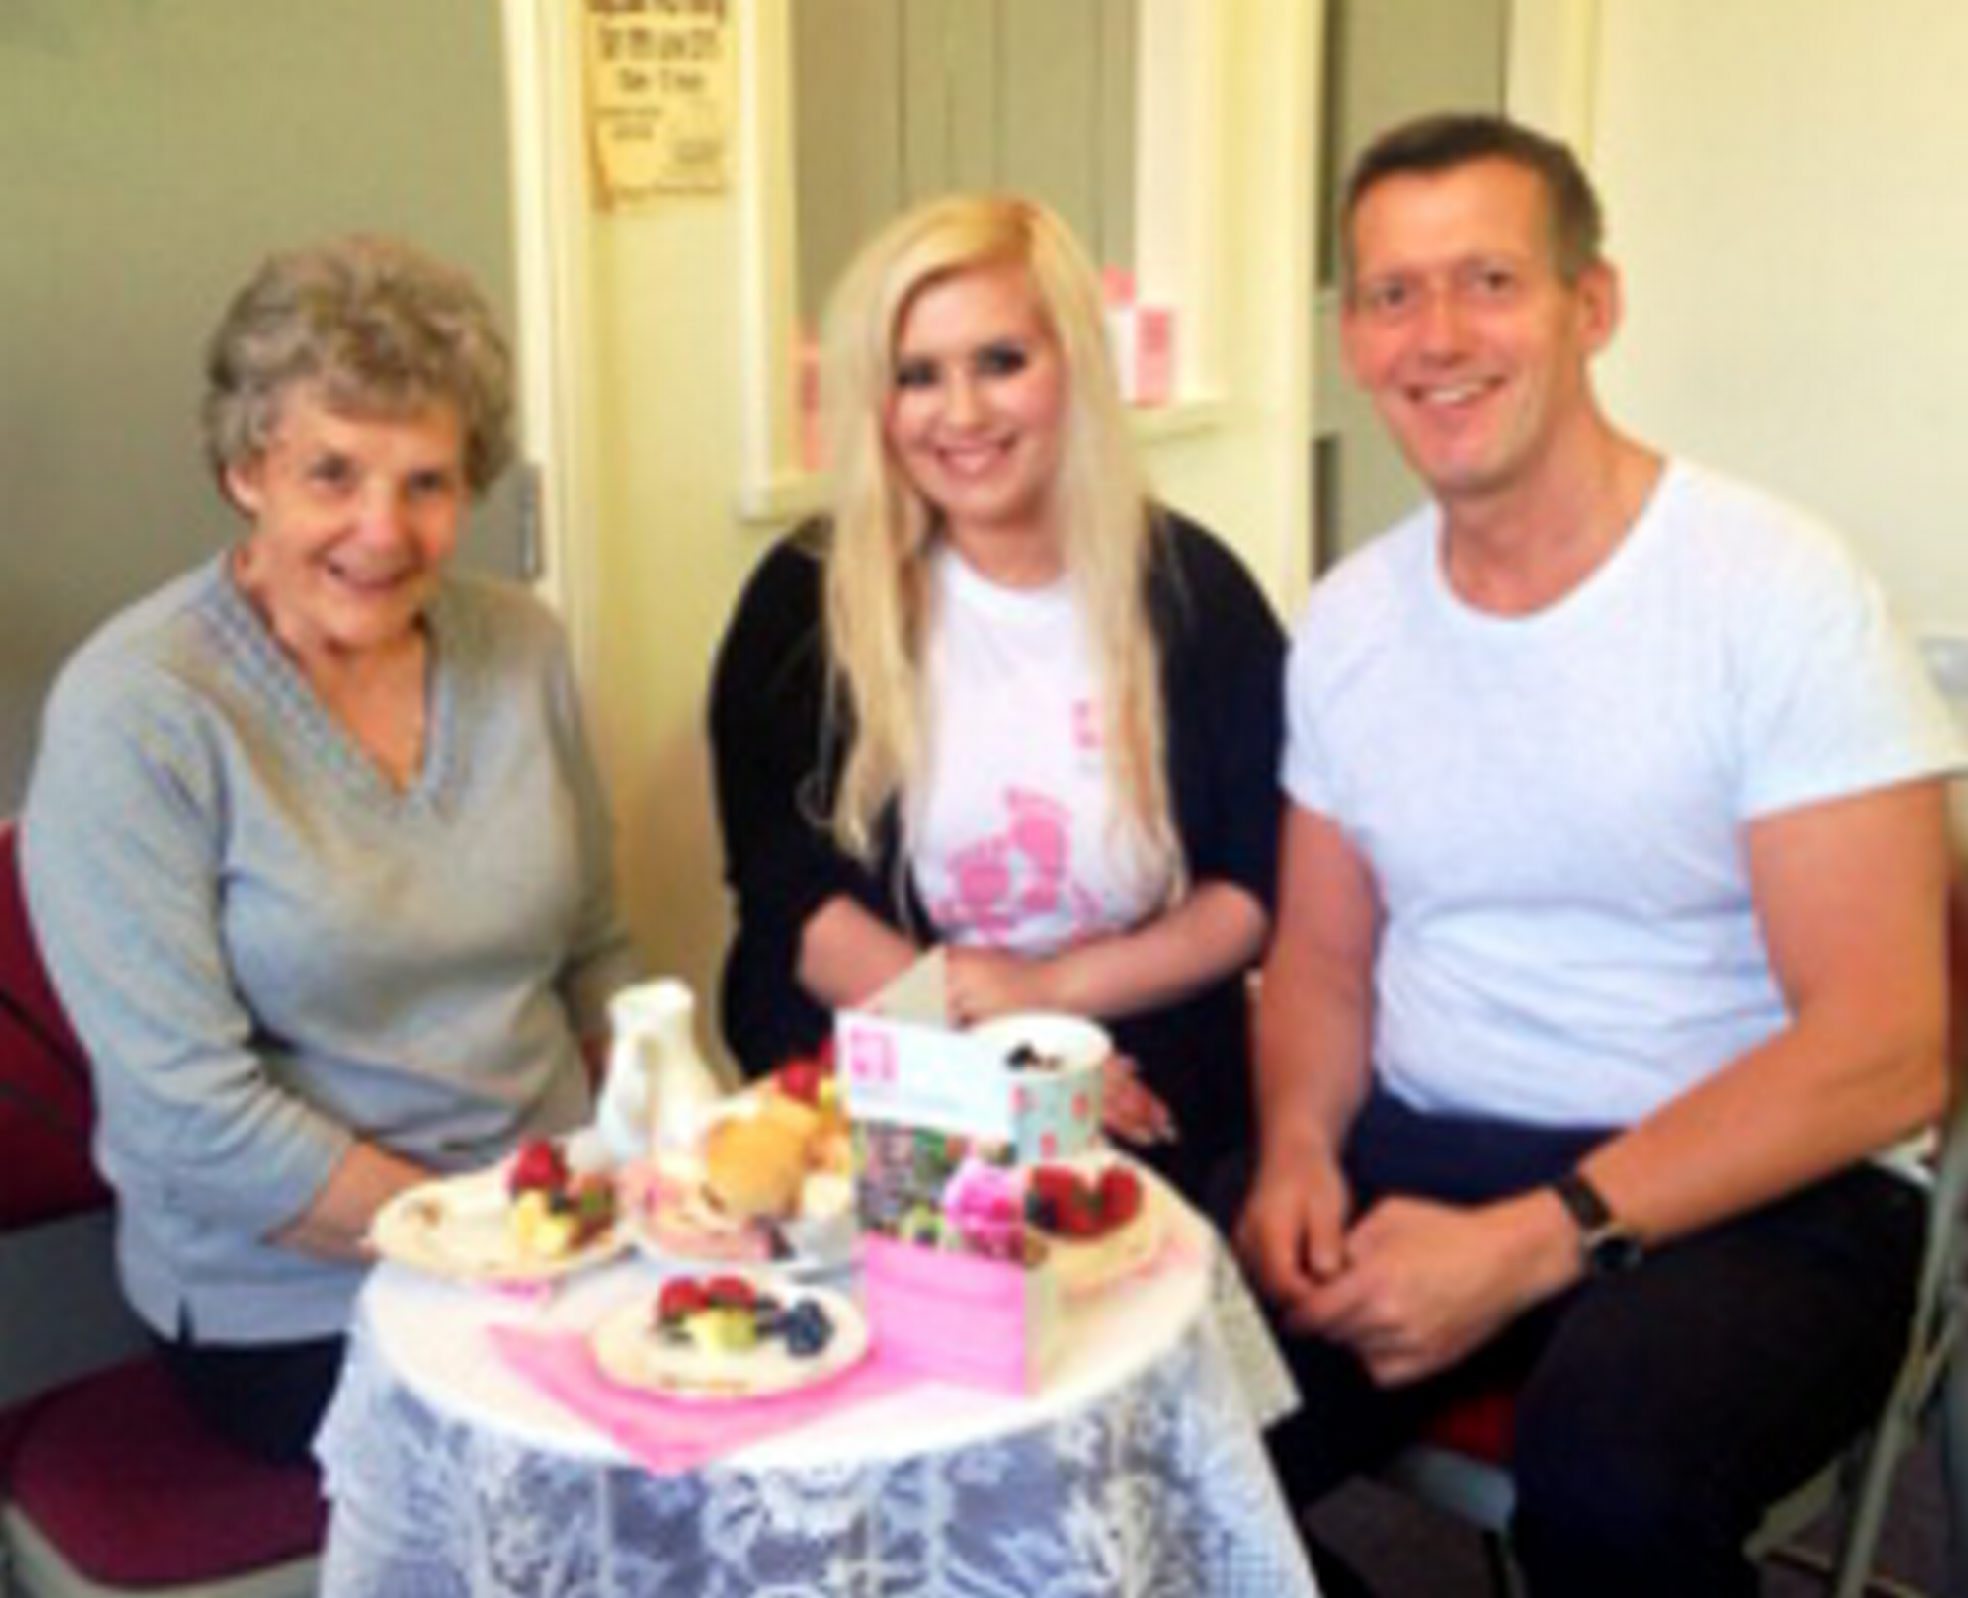 Newly-qualified solicitor celebrates success with charity afternoon tea for Bolton Hospice